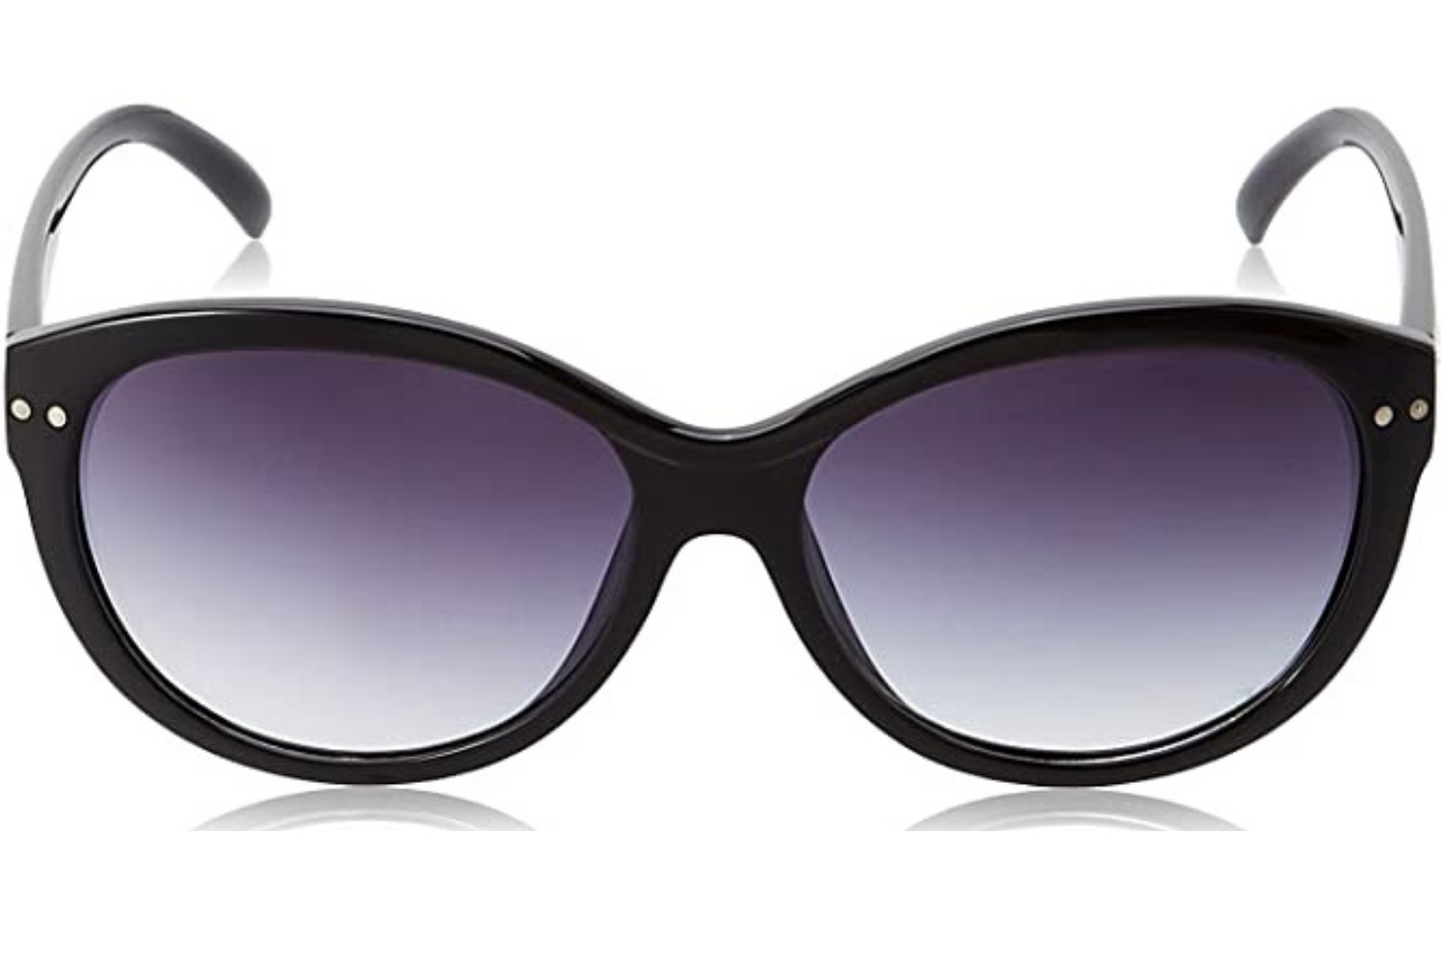 French Connection Sunglasses FC7182 C2